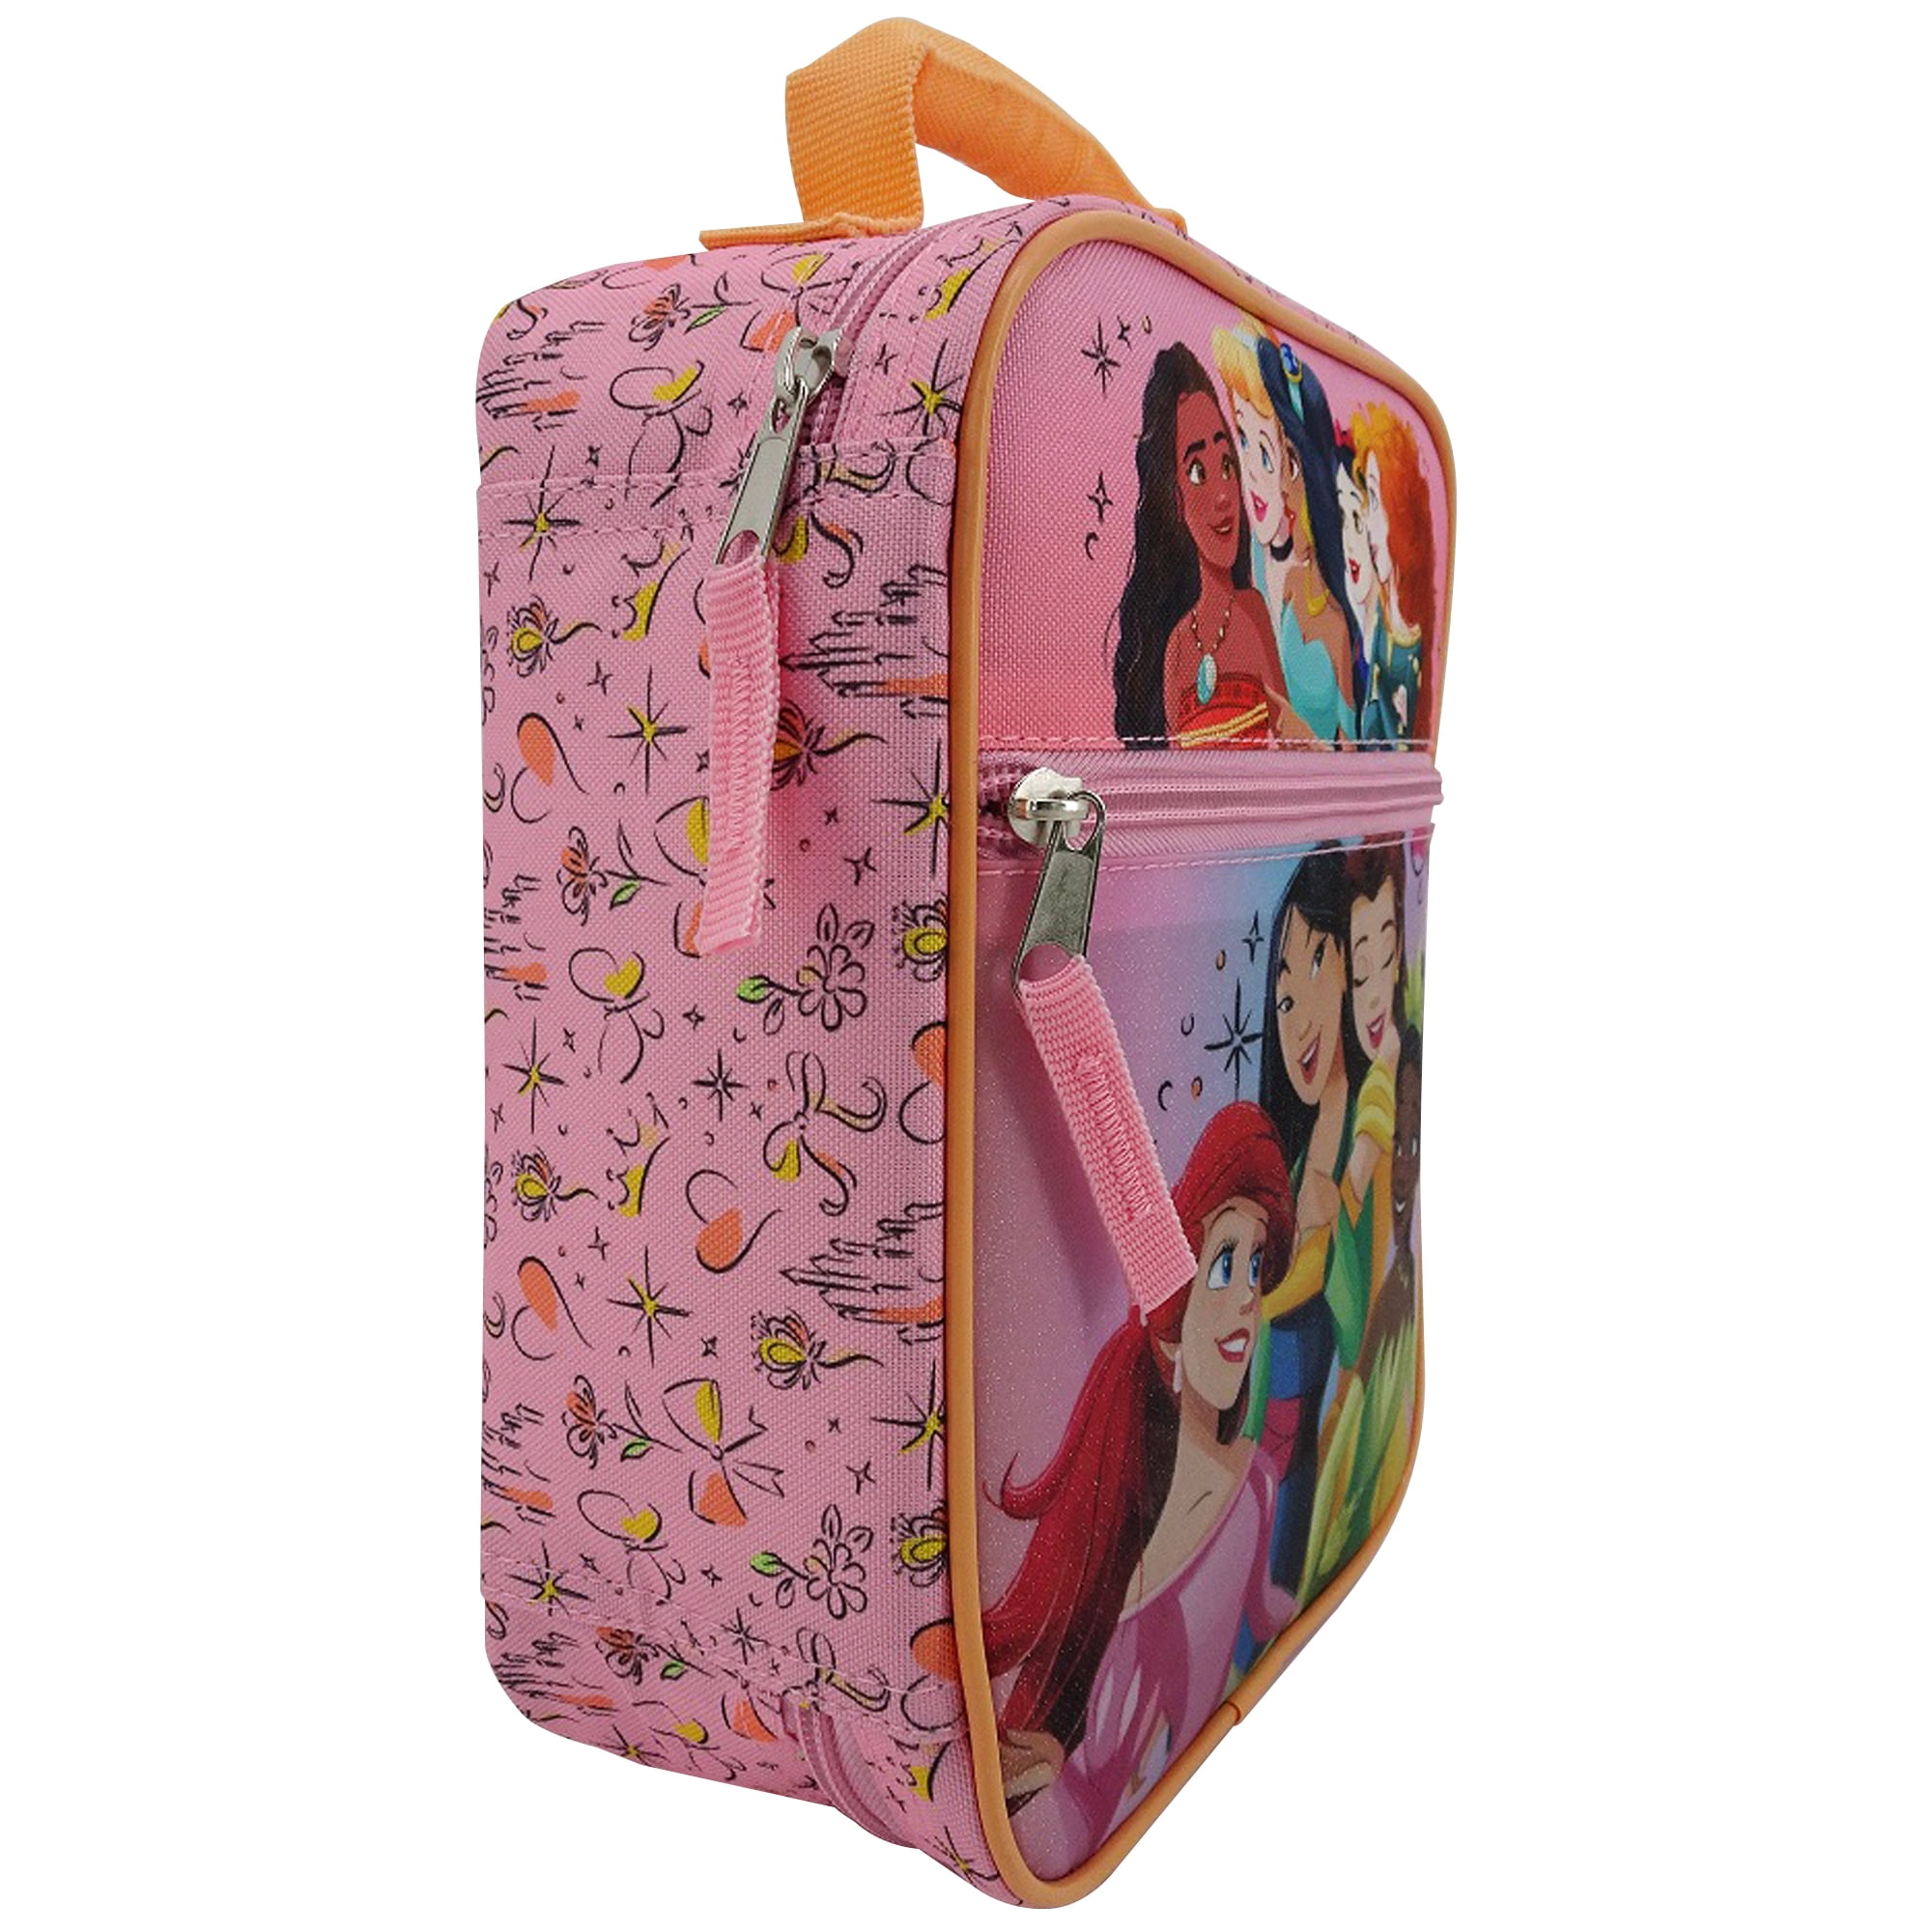 Lunch Bag - Disney - Princess - All Princess Girls New Lunch Case Gifts  503864 